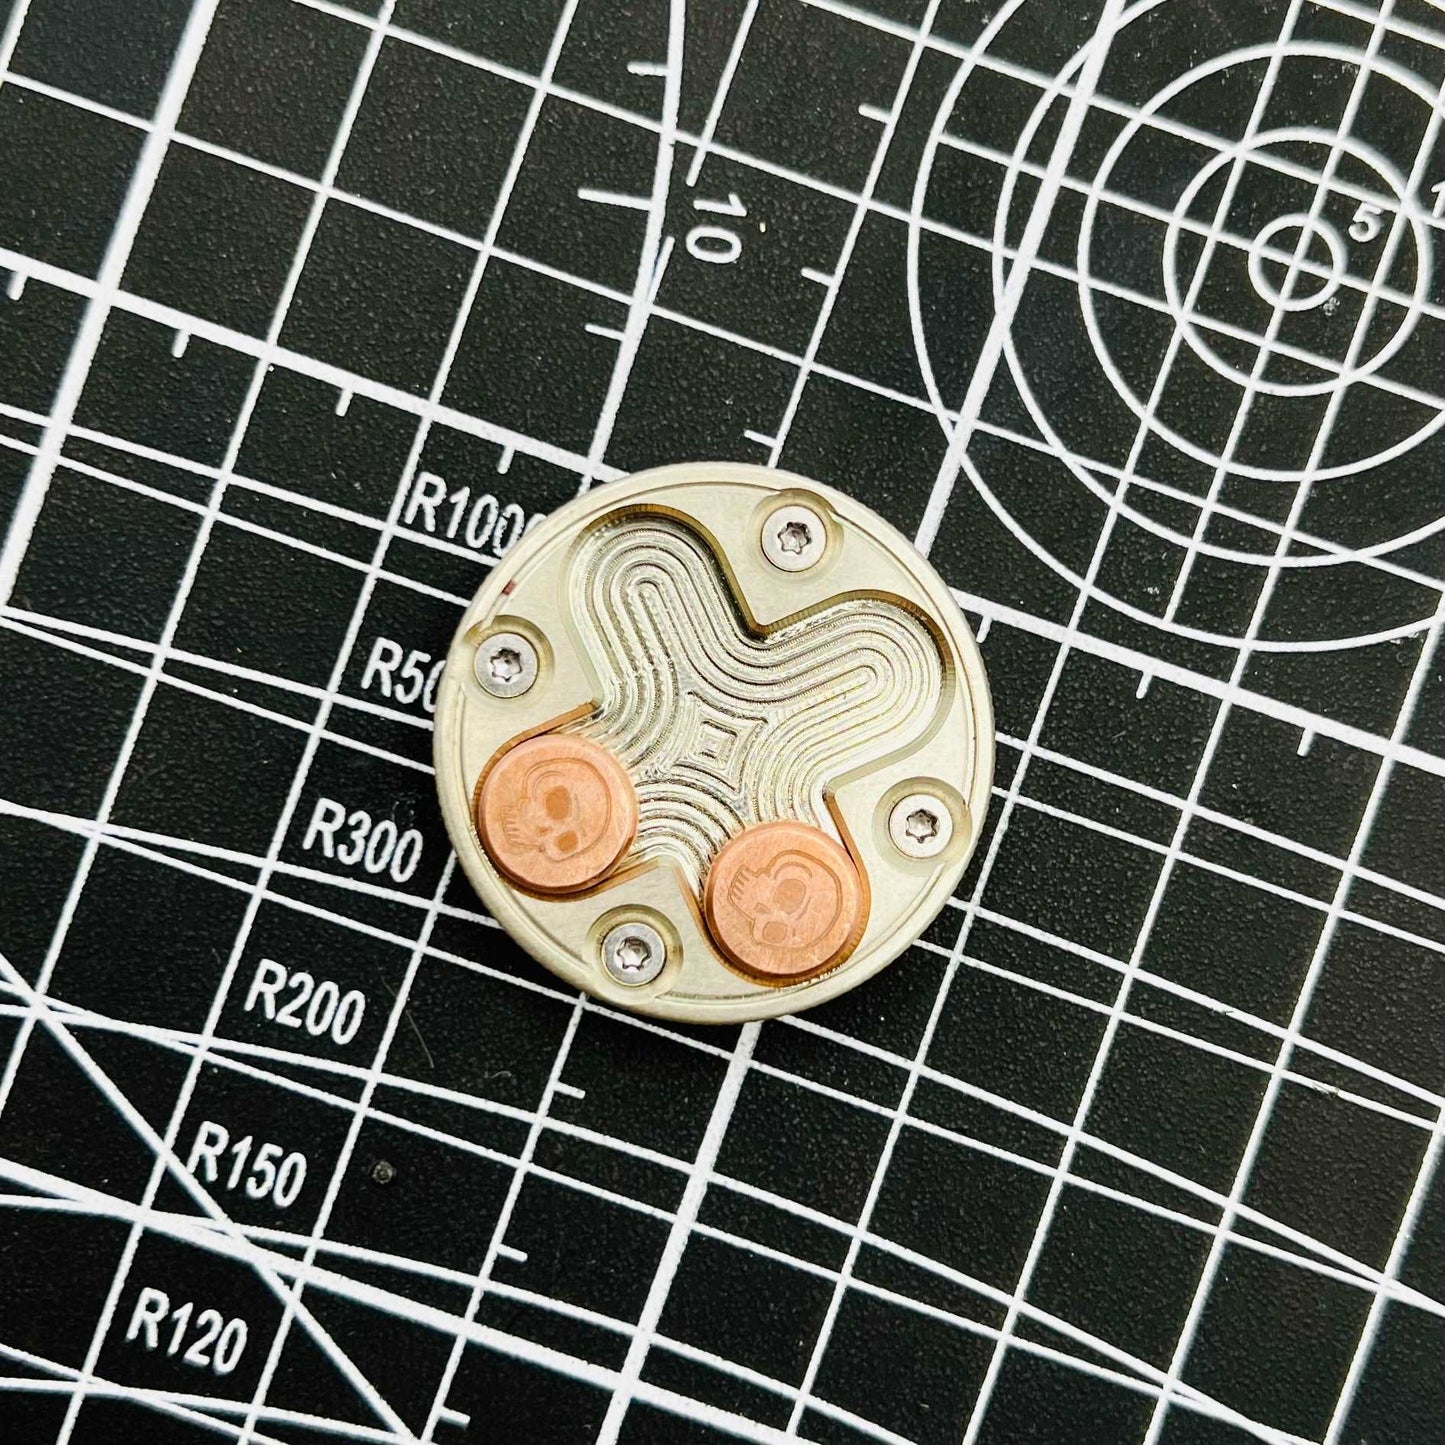 CoinFig Shift - Haptic Modular Magnetic Coin